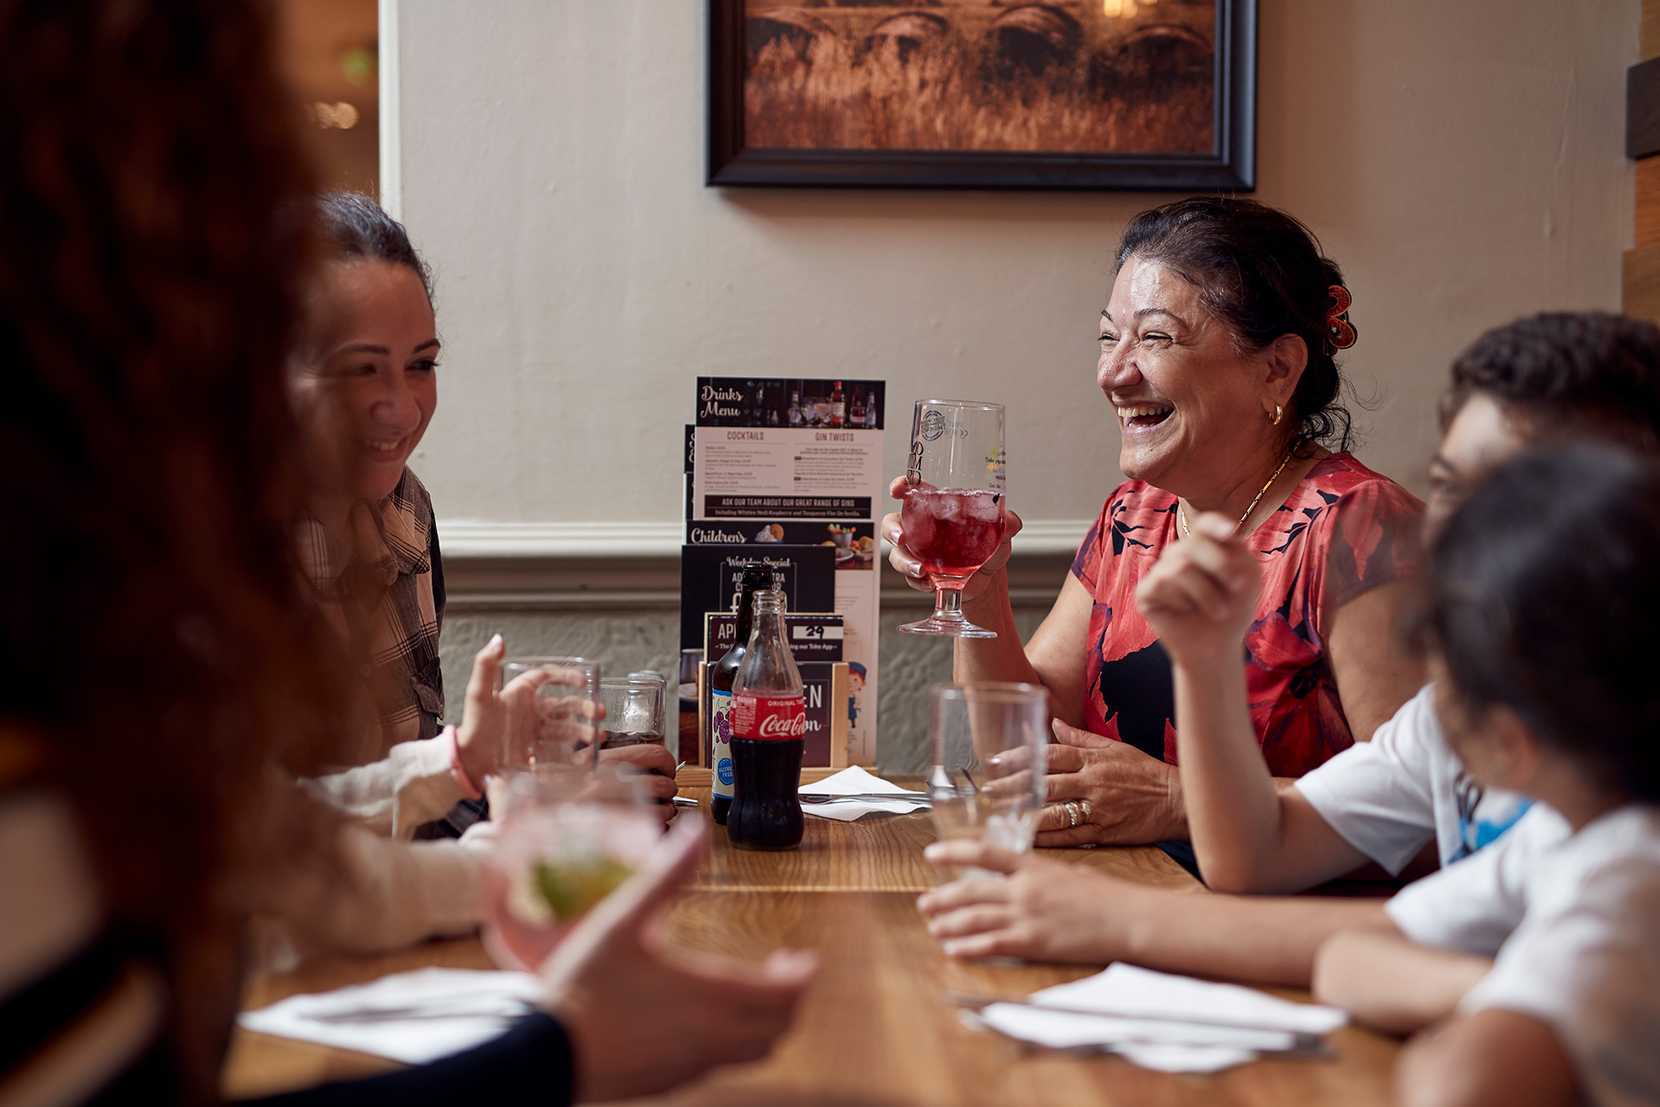 A family sit around a table together, laughing and sharing drinks. One woman is holding a fruity cider with ice.